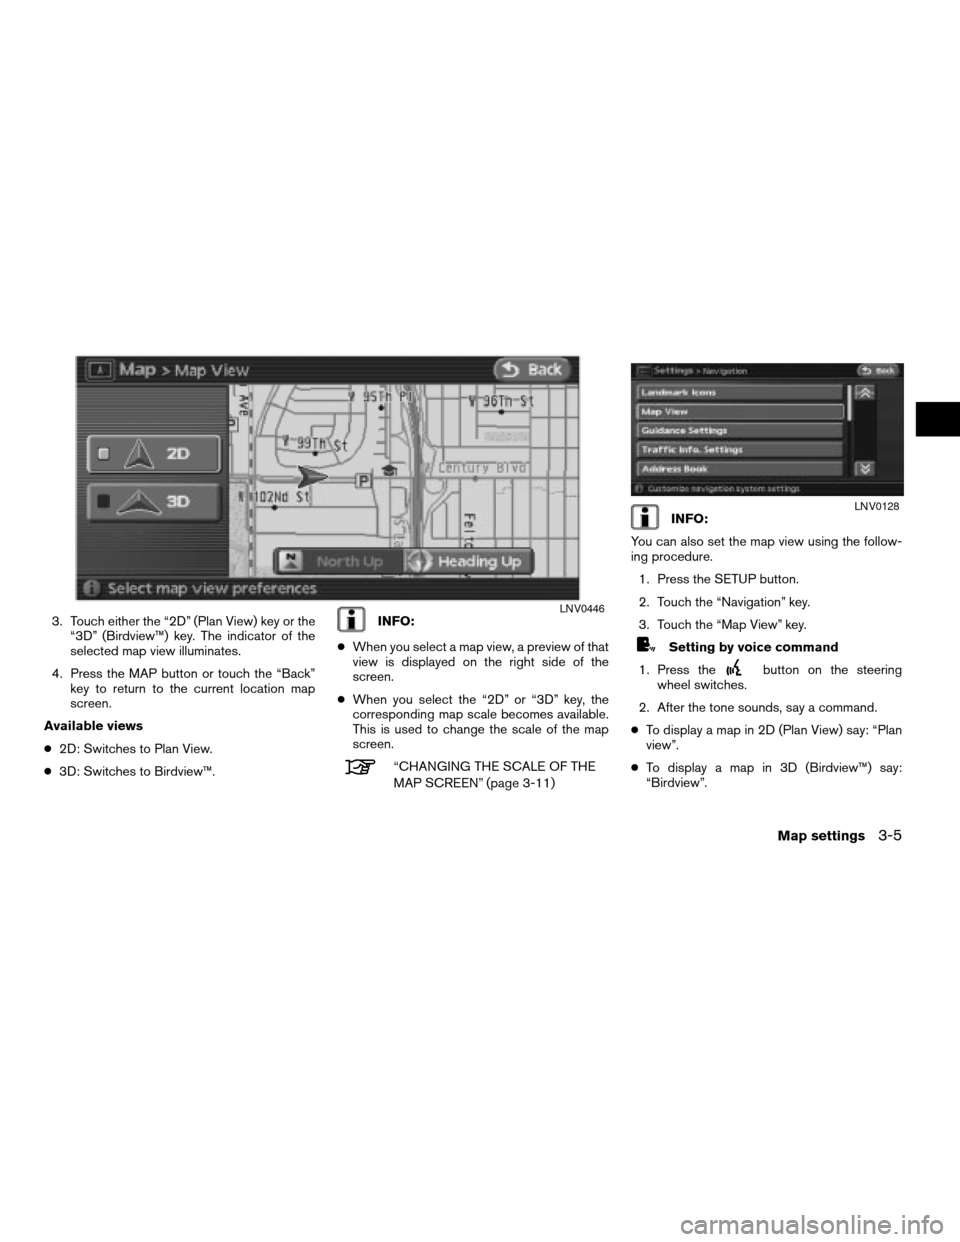 NISSAN ALTIMA 2008 L32A / 4.G Navigation Manual 3. Touch either the “2D” (Plan View) key or the
“3D” (Birdview™) key. The indicator of the
selected map view illuminates.
4. Press the MAP button or touch the “Back”
key to return to the